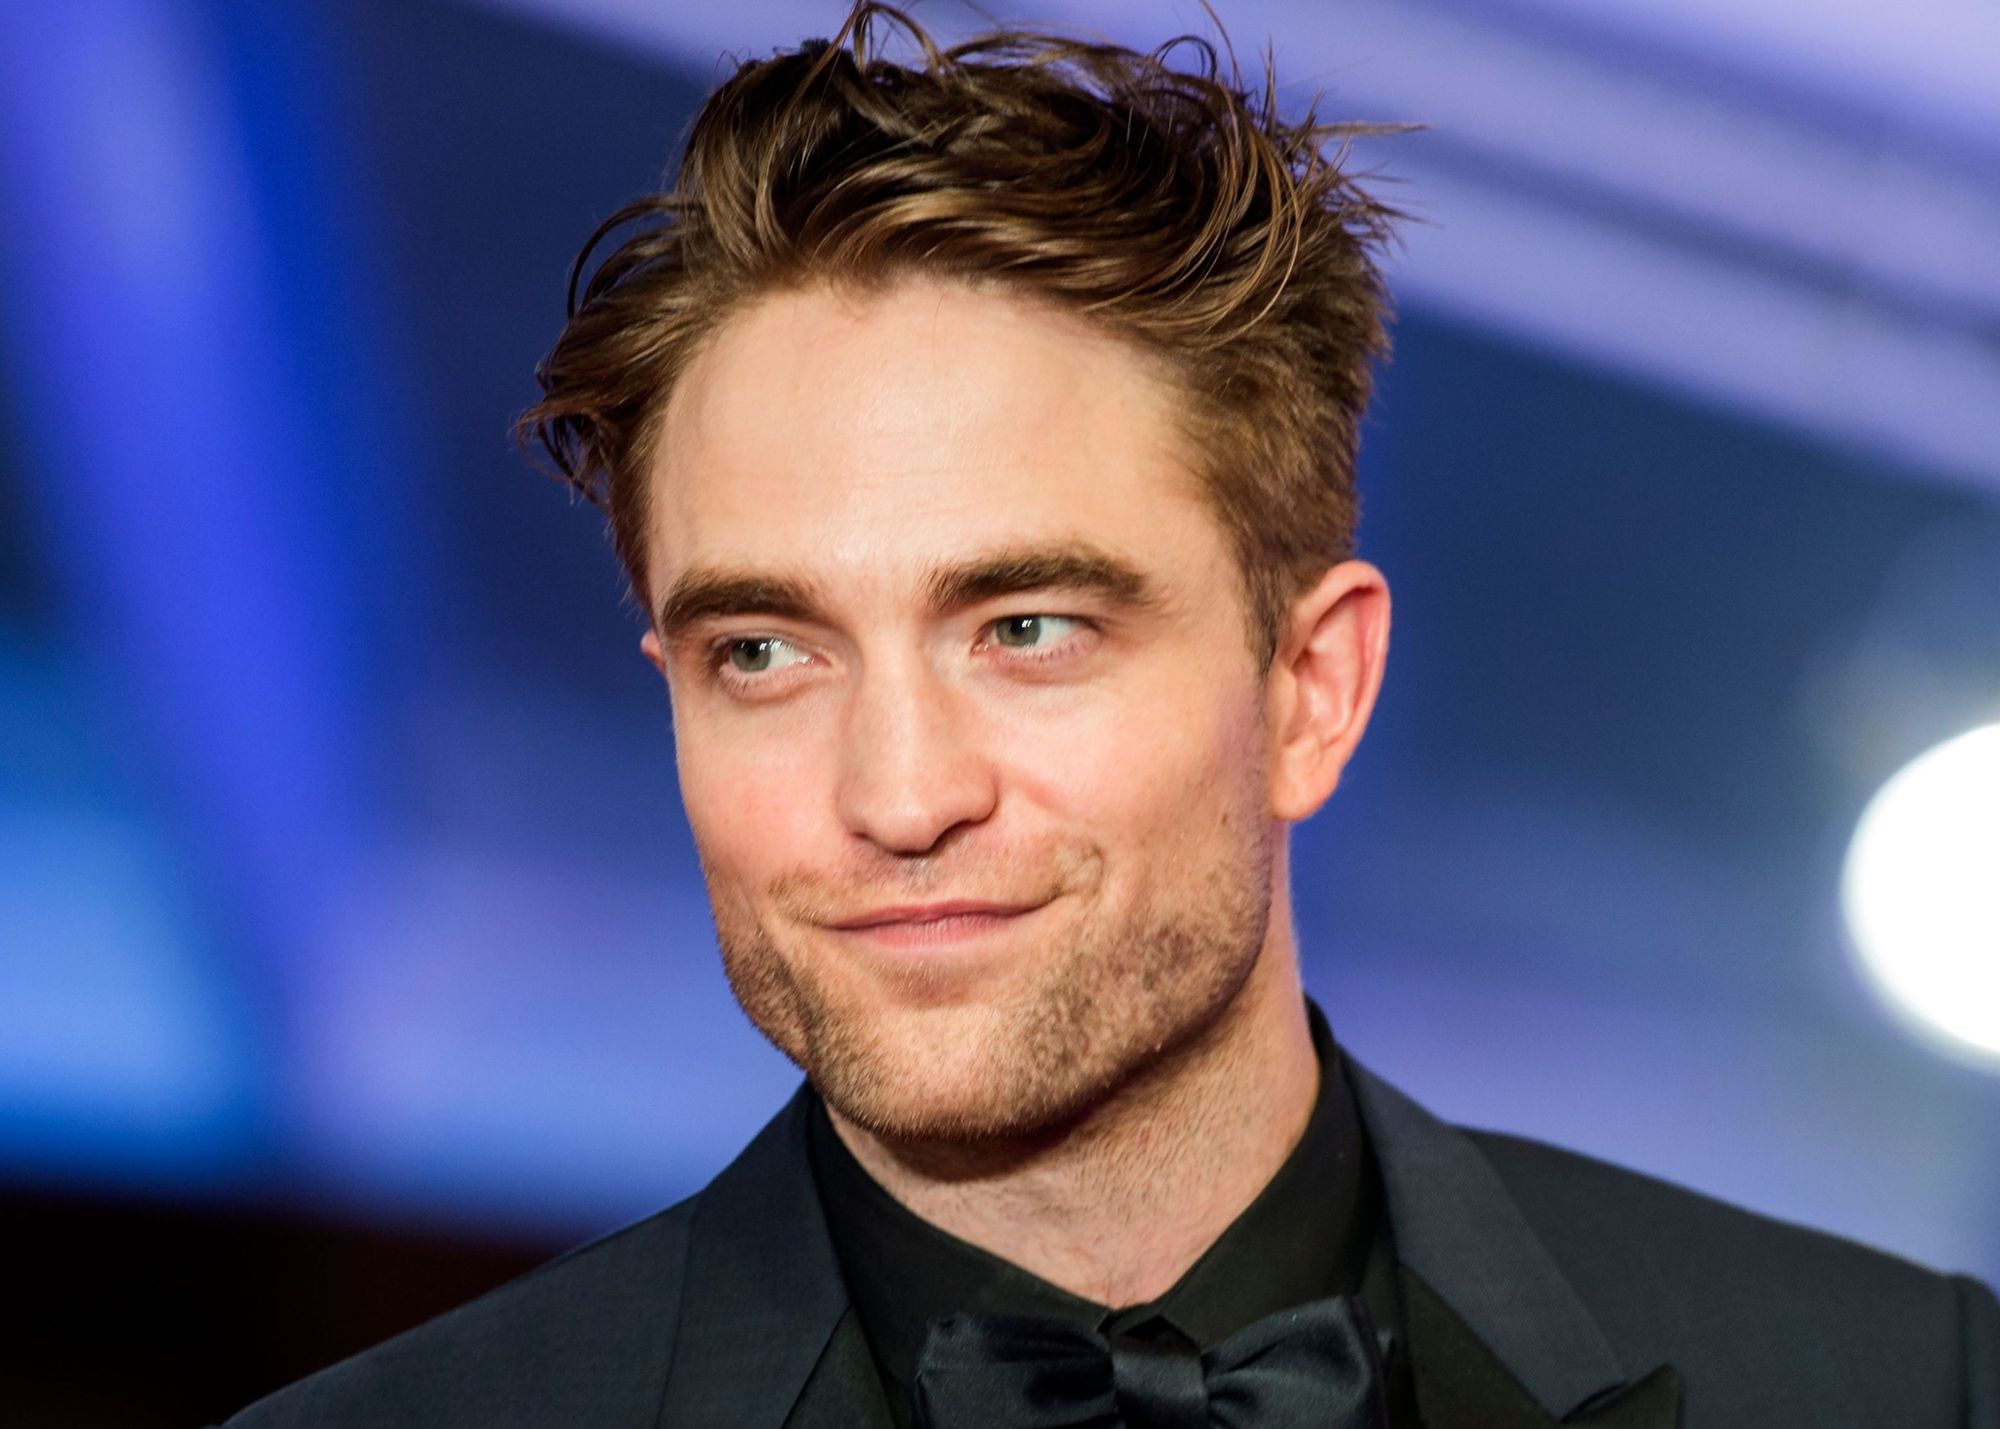 In his formal attire, Robert Pattinson wears a bowtie and a friendly smile